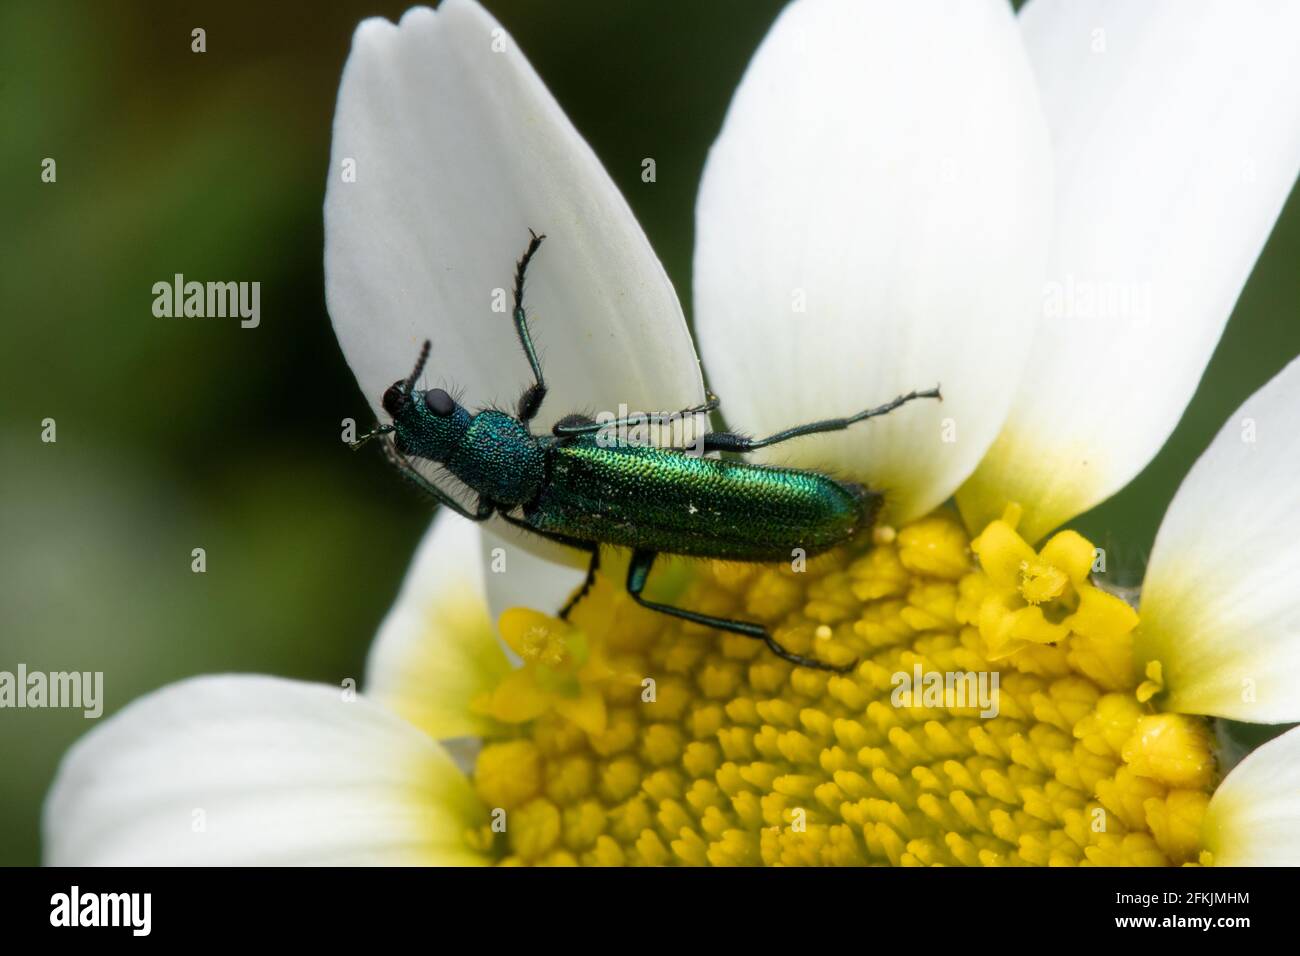 A Spanish fly on a daisy flower after feeding on nectar from it Stock Photo